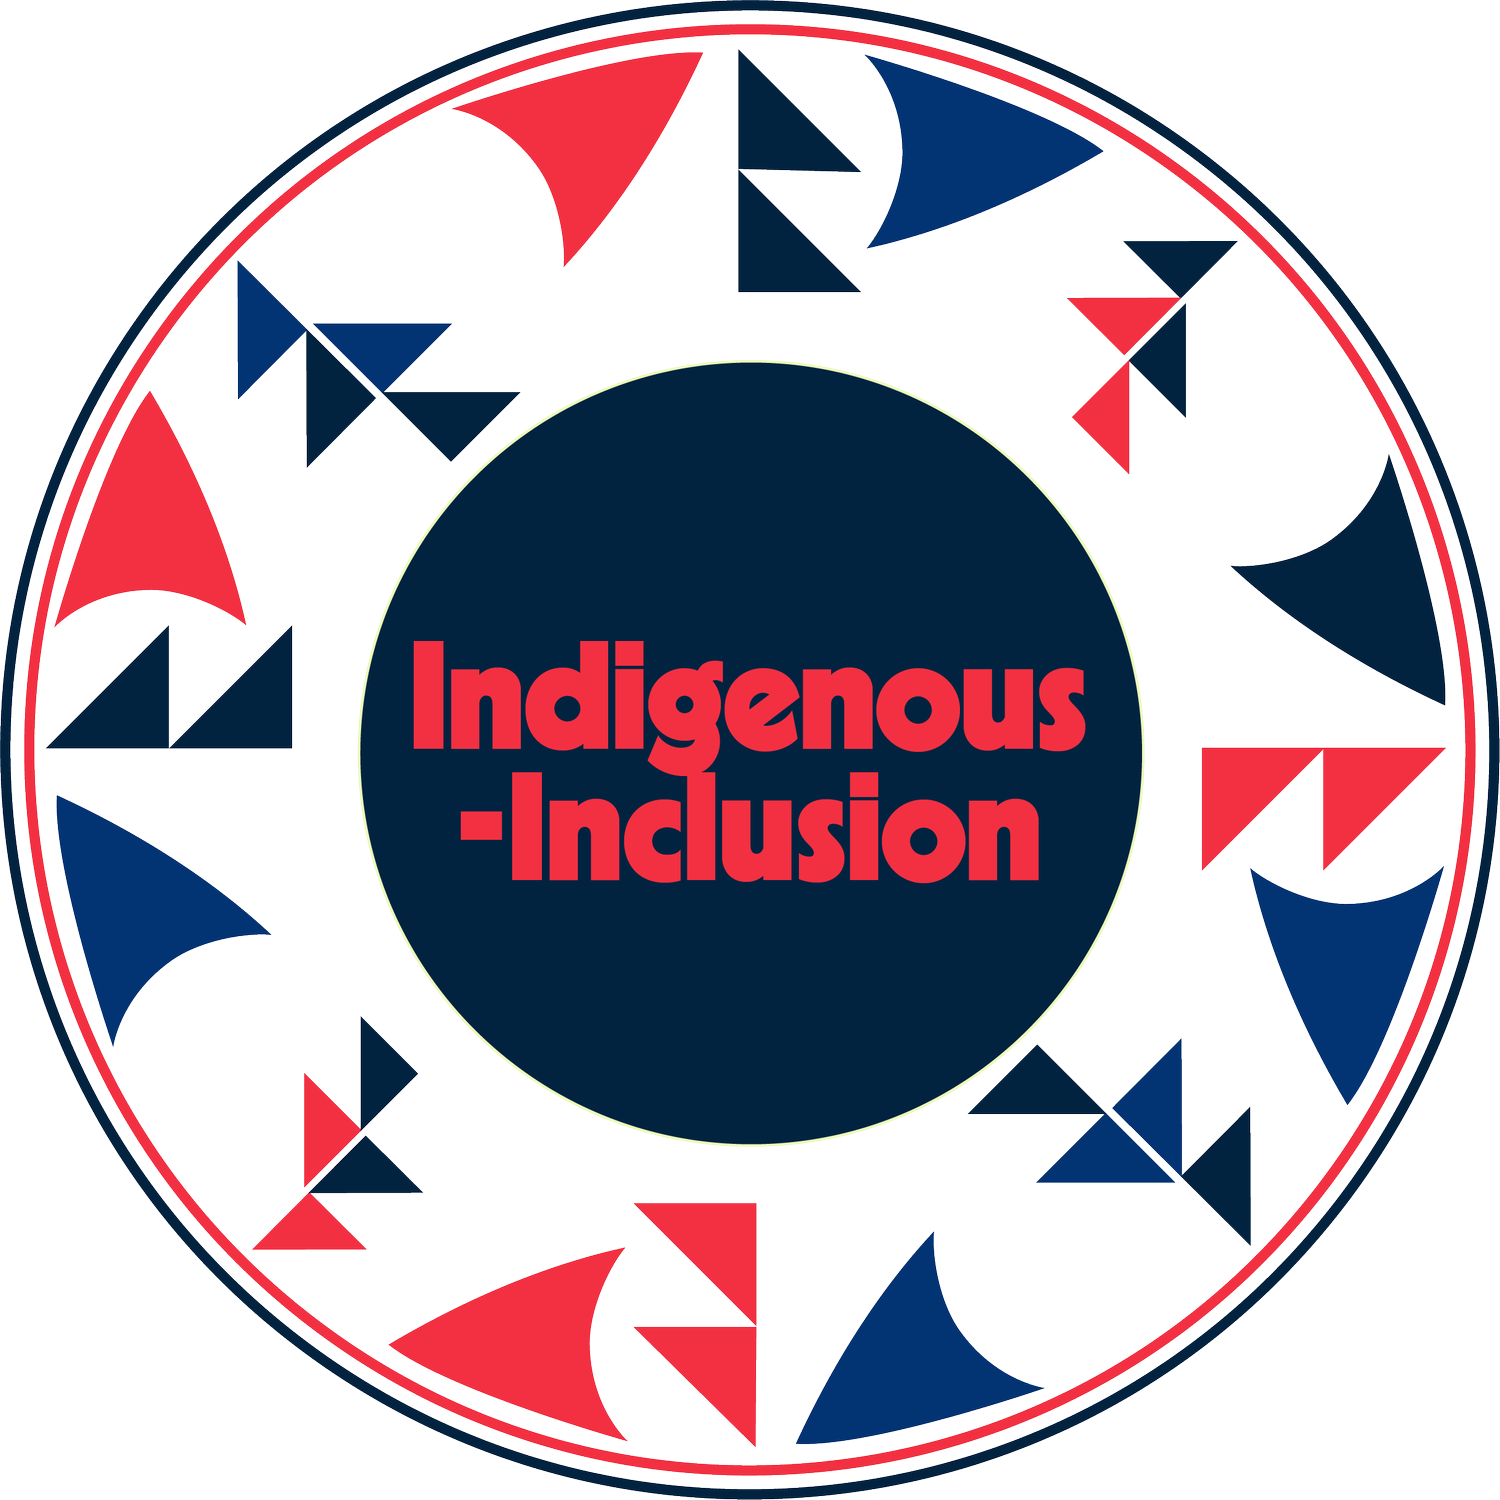 Indigenous Inclusion, facilitated by Nahanee Creative